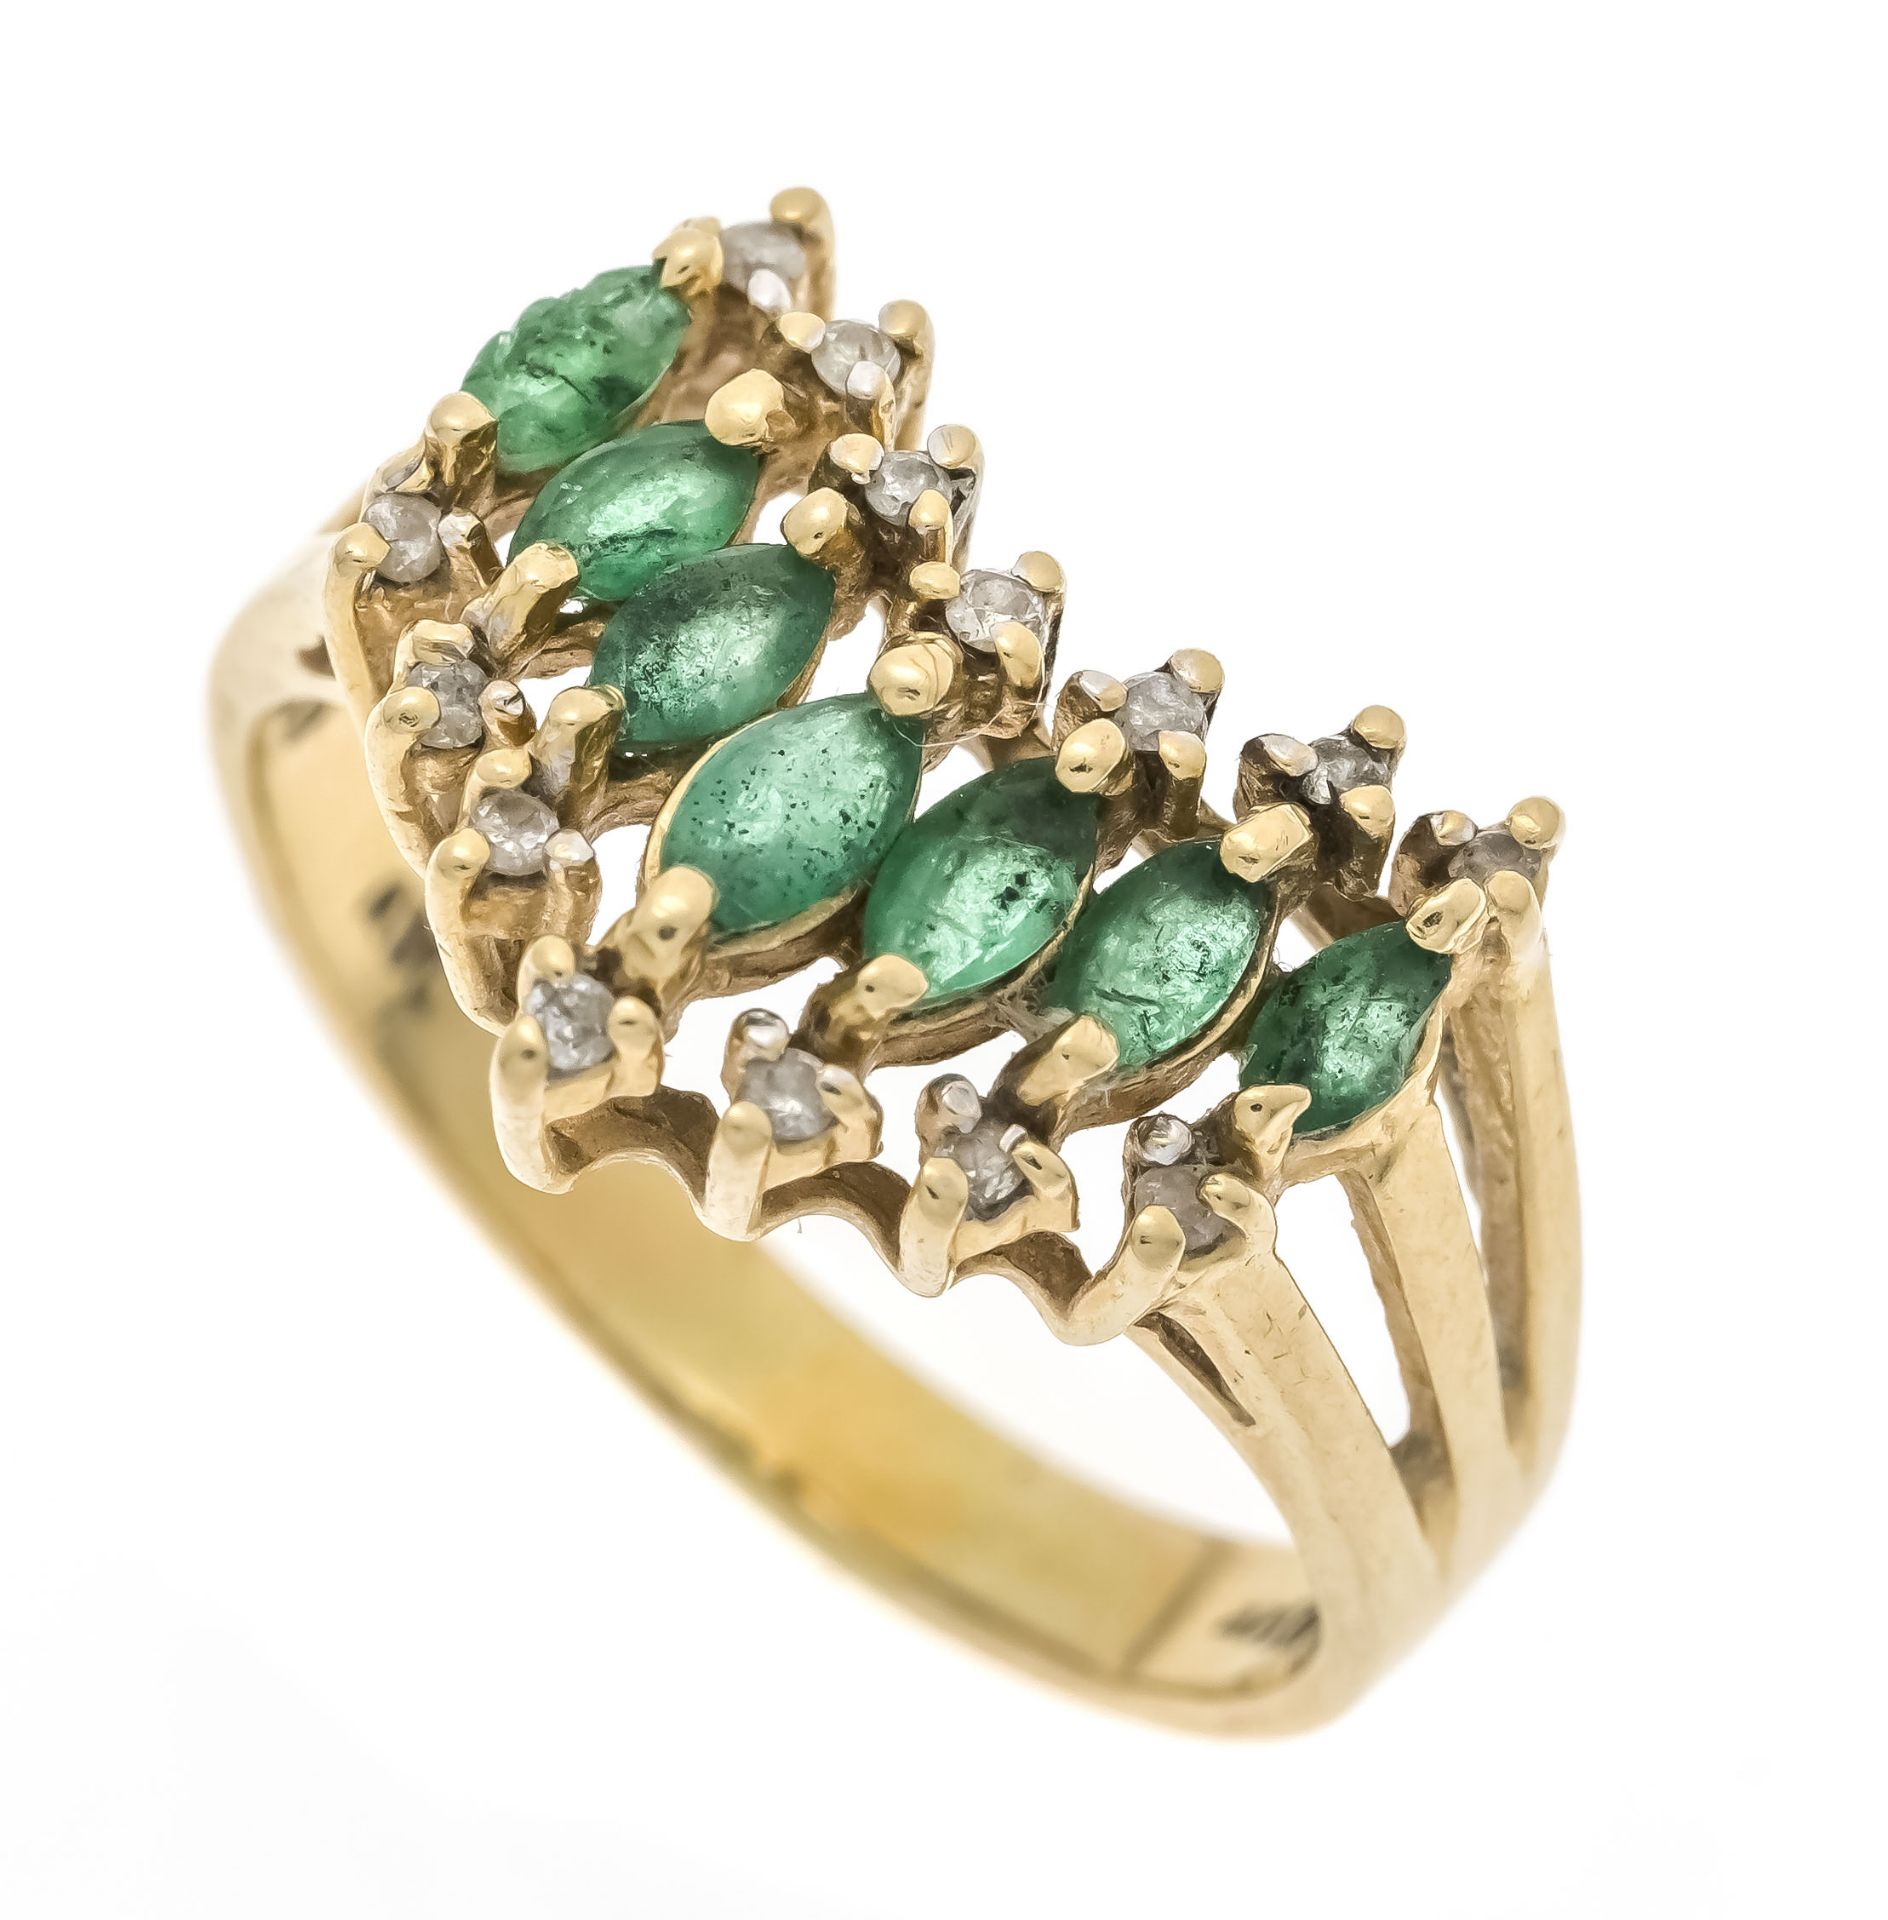 Emerald-brilliant ring GG 585/000 with 7 faceted emerald navettes 4.2 x 2.2 mm green, translucent